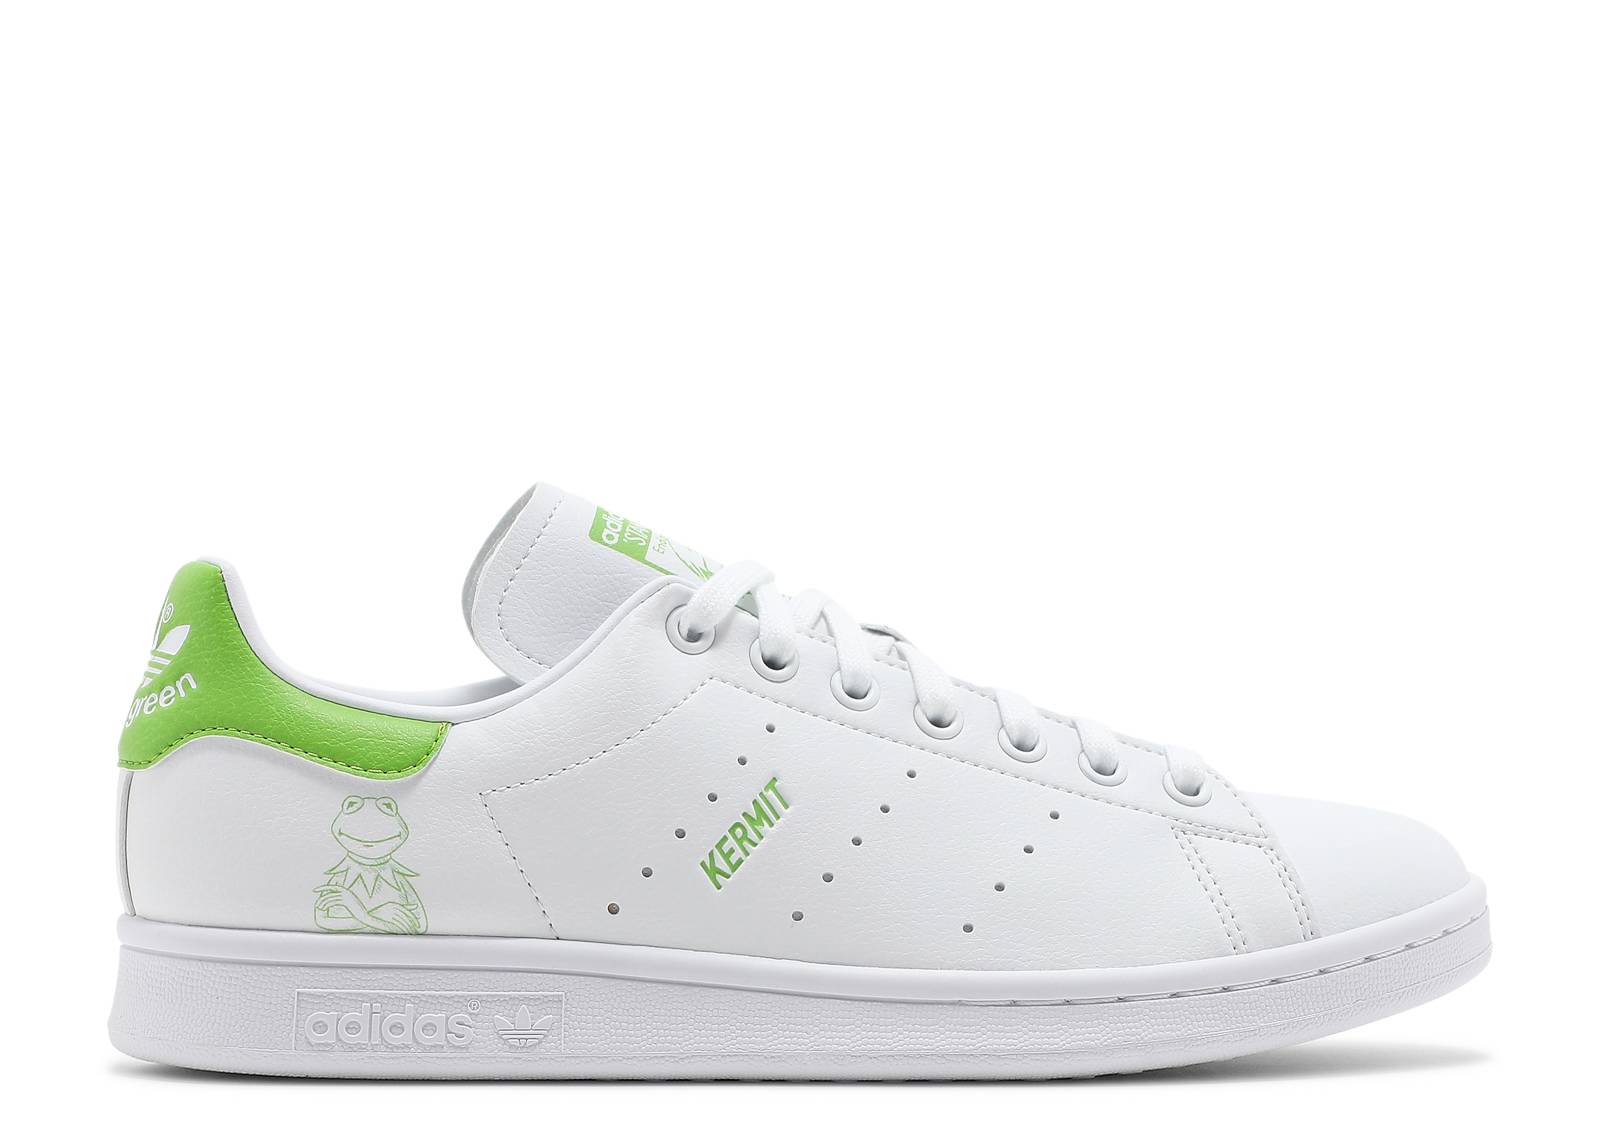 The Muppets x Stan Smith 'Kermit The Frog'